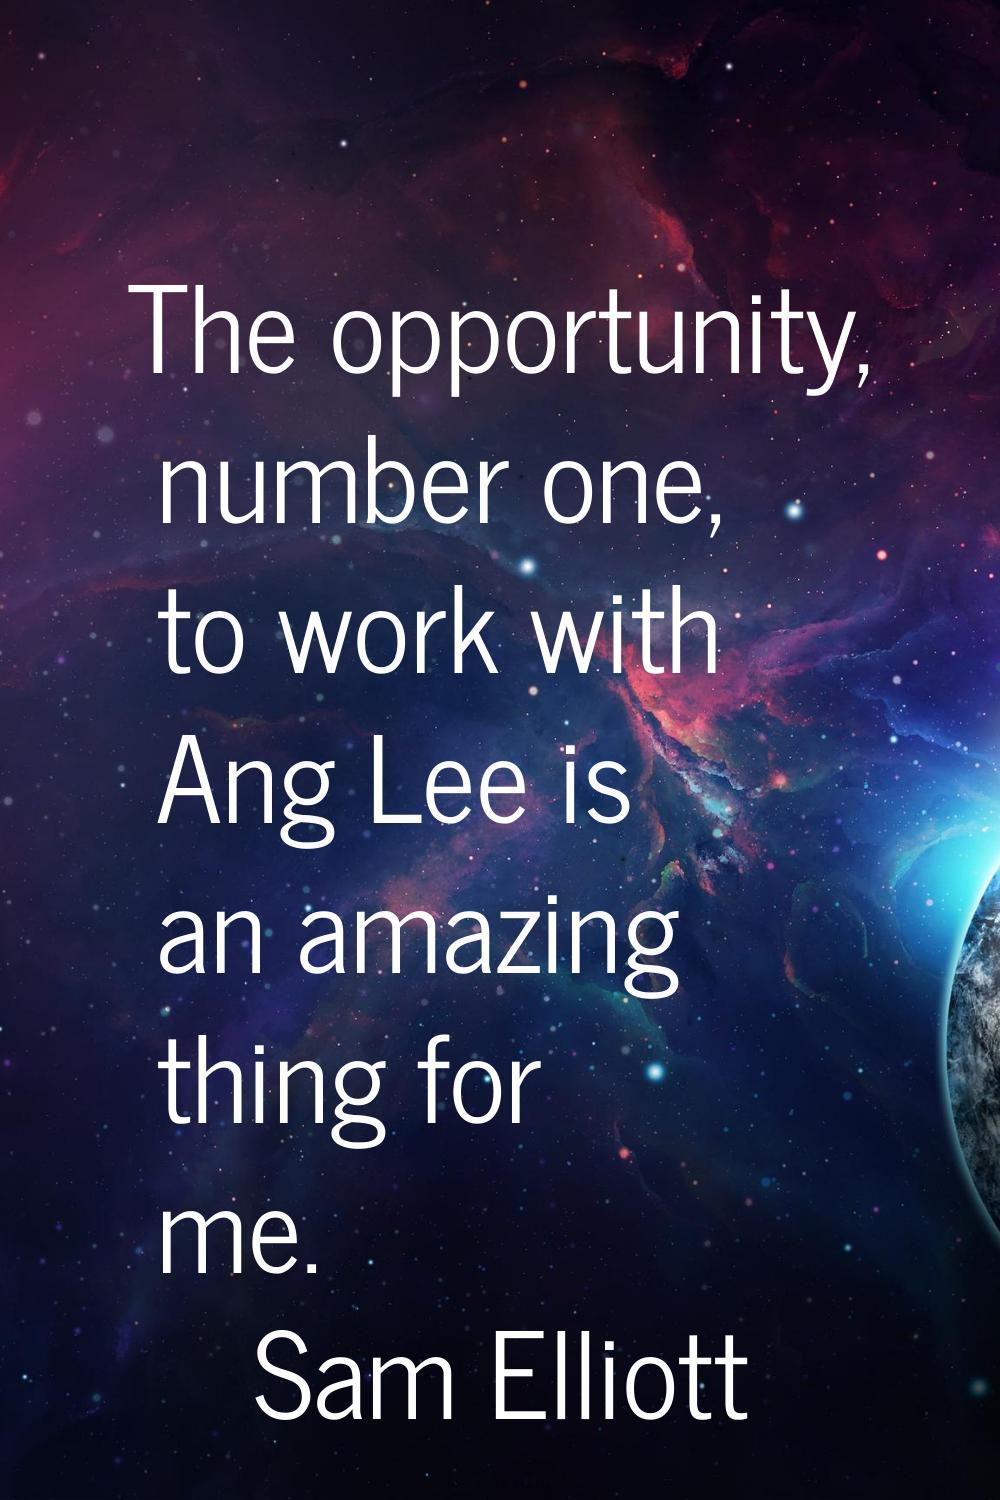 The opportunity, number one, to work with Ang Lee is an amazing thing for me.